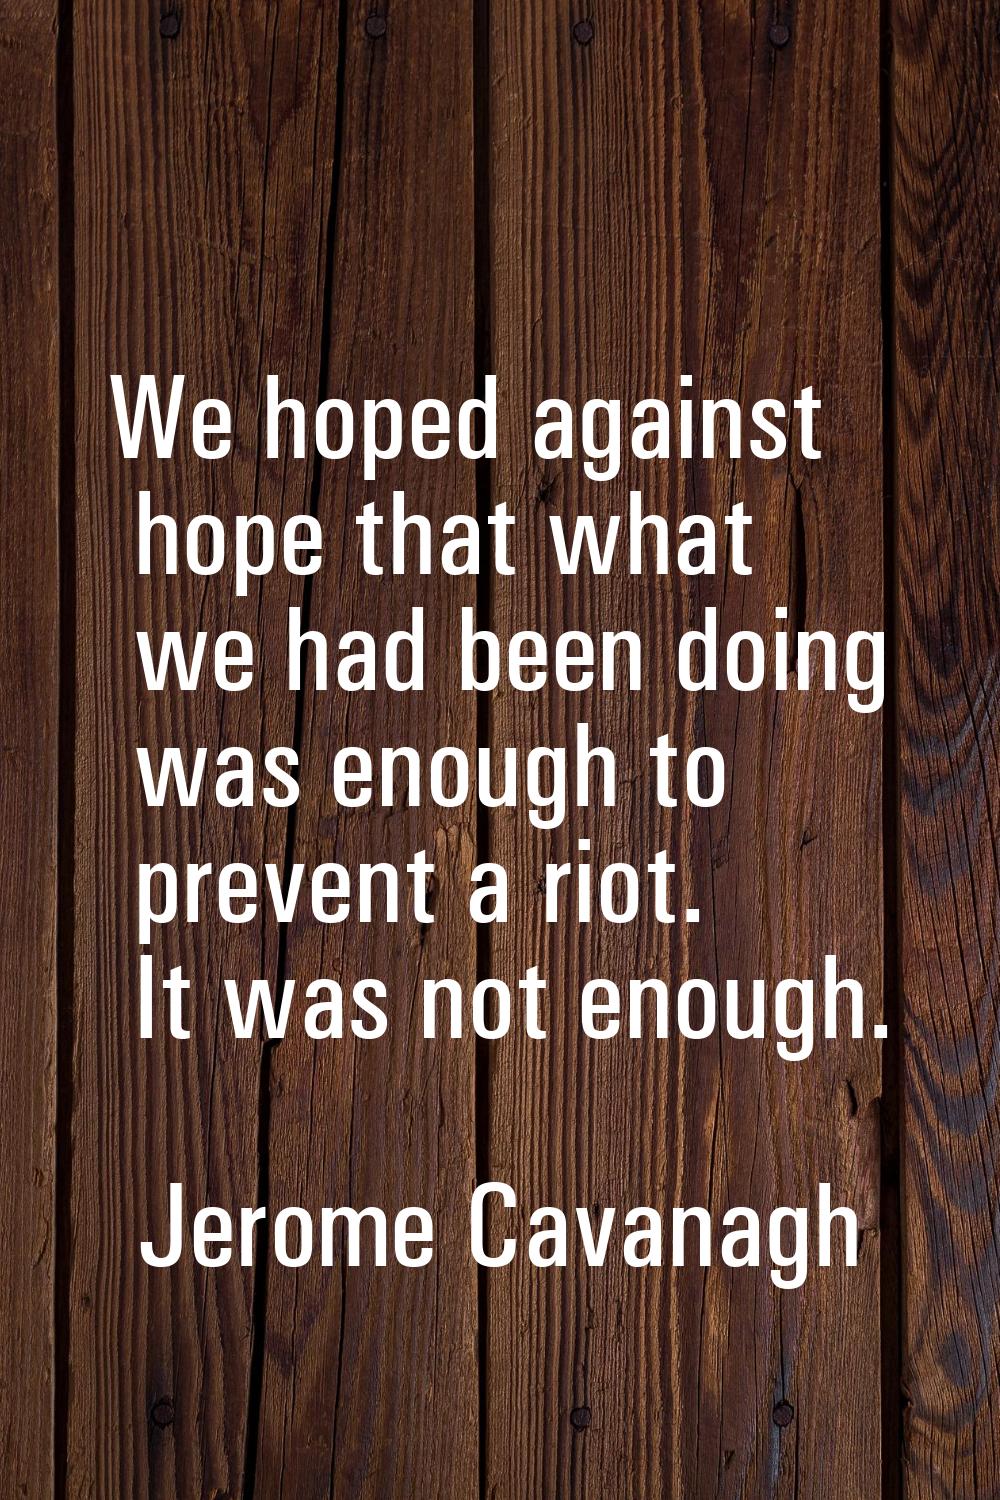 We hoped against hope that what we had been doing was enough to prevent a riot. It was not enough.